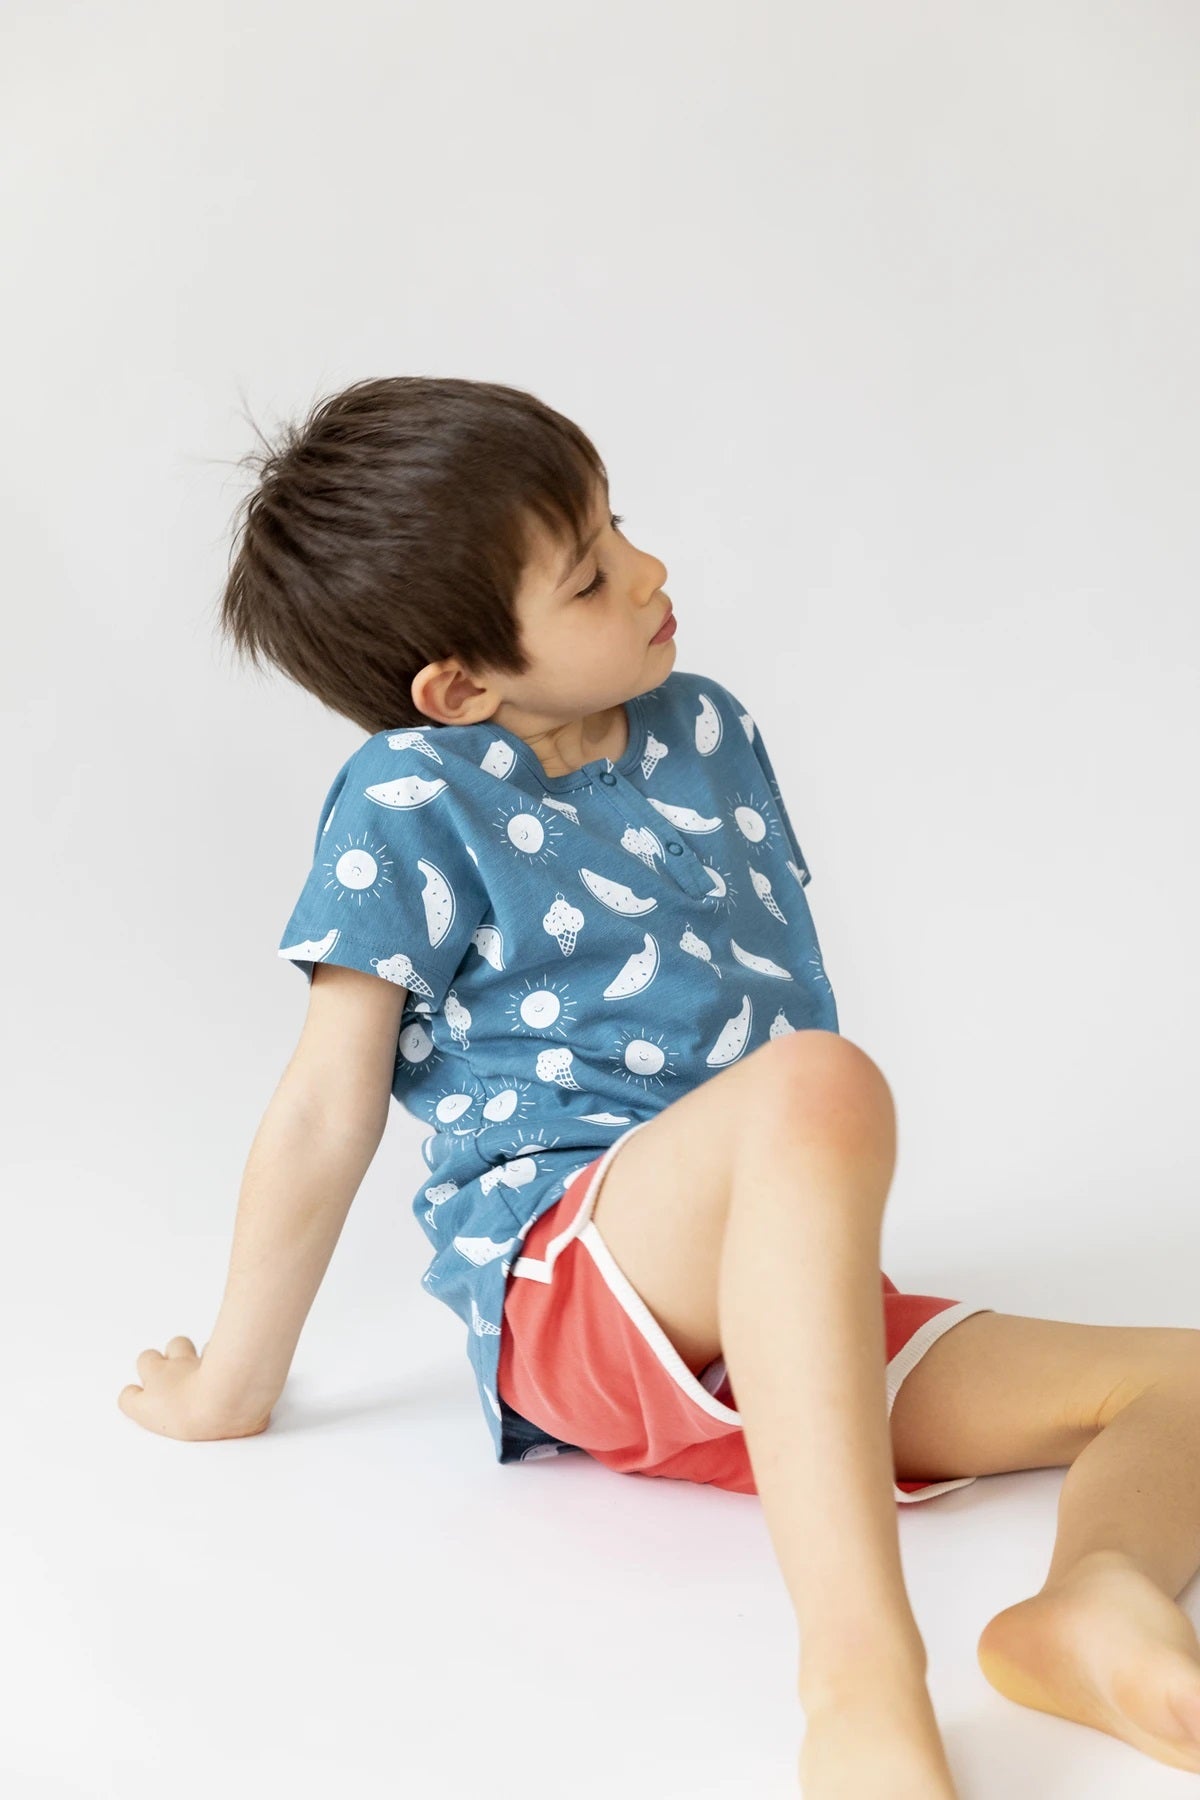 Organic cotton "Run" Shorts - Aged 3m to 3 Yrs- Colored Cranberry